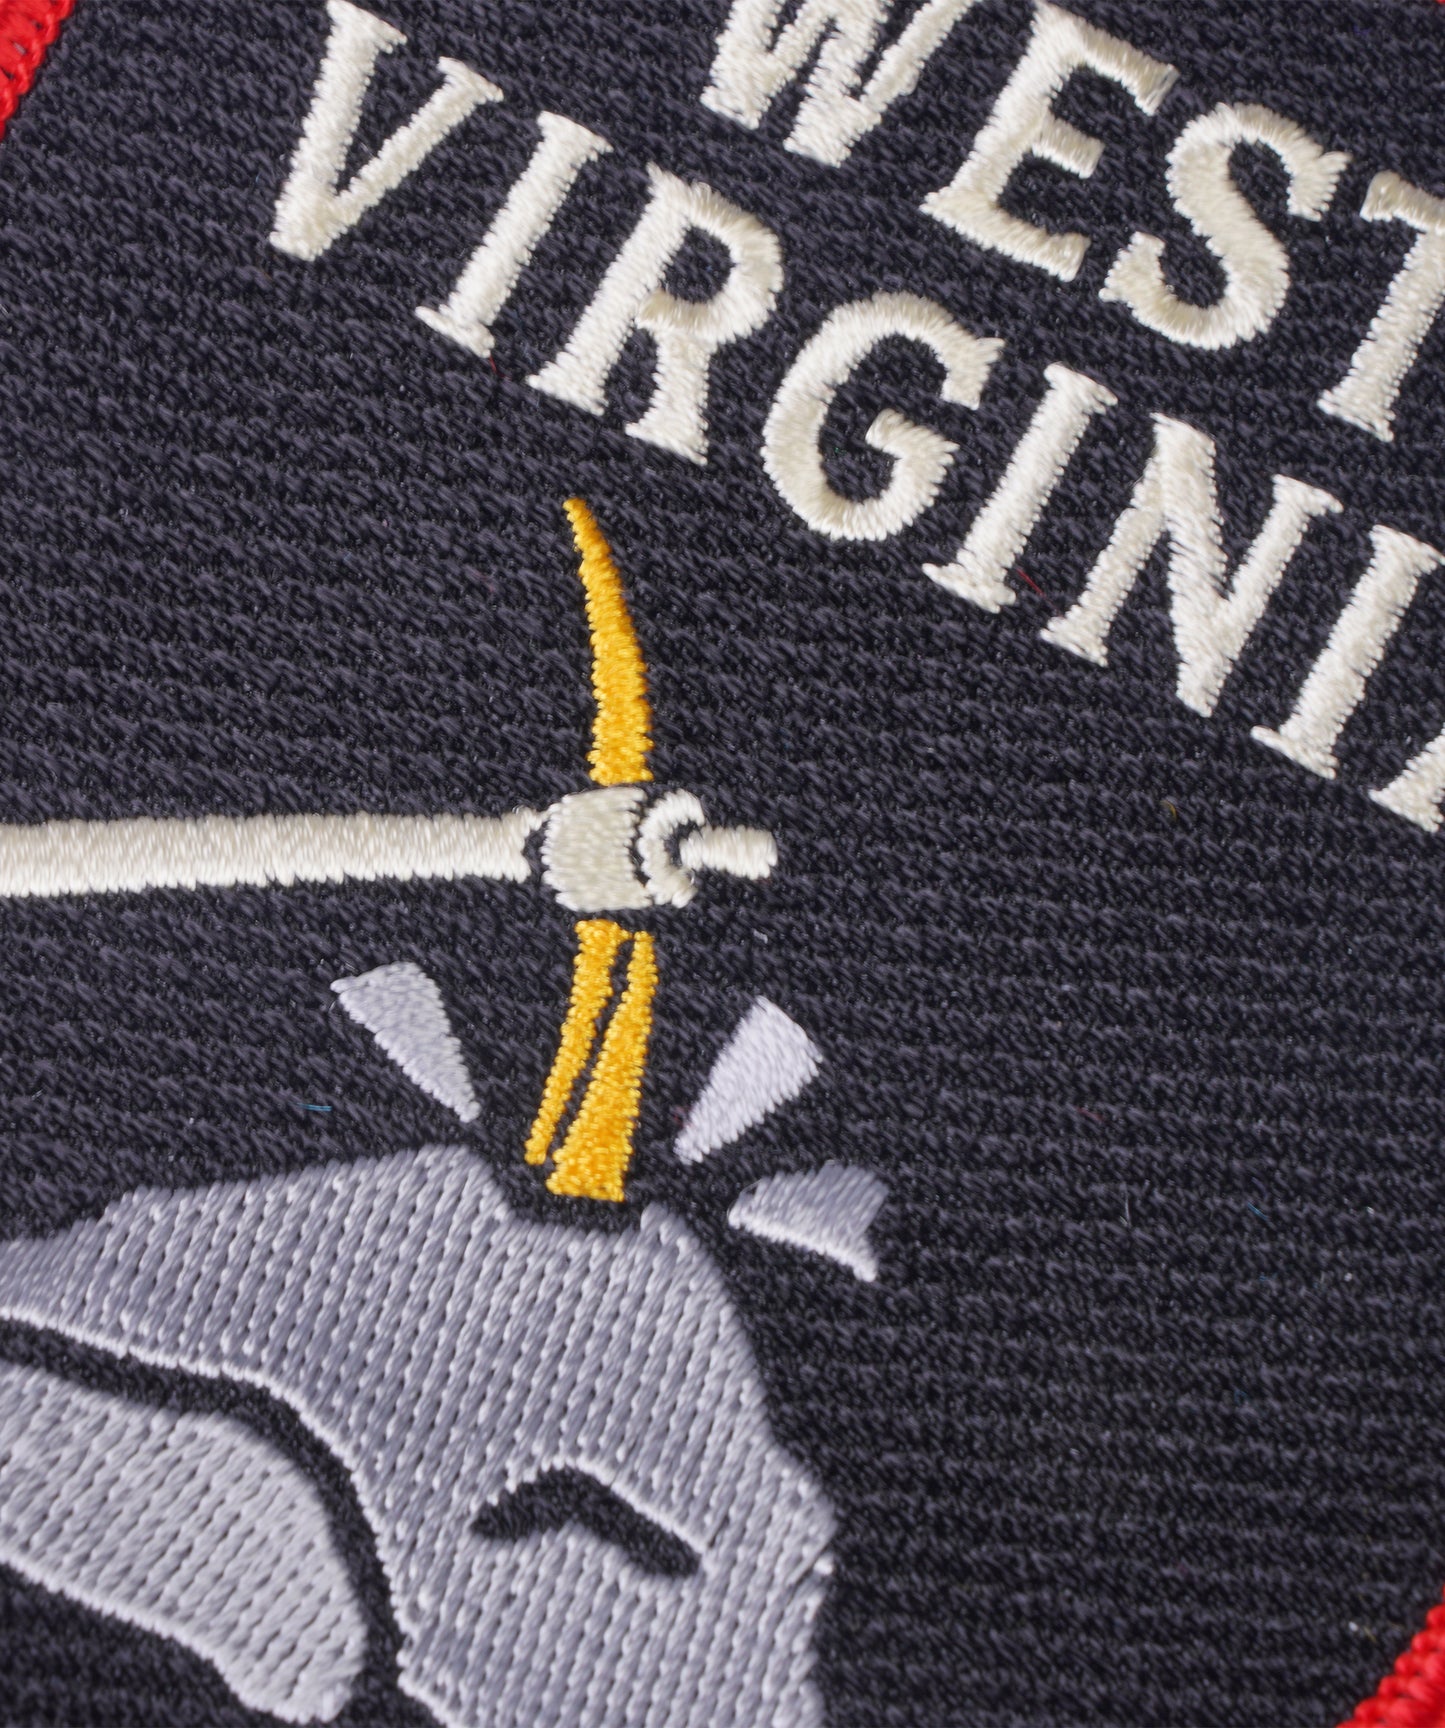 West Virginia Embroidered Patch